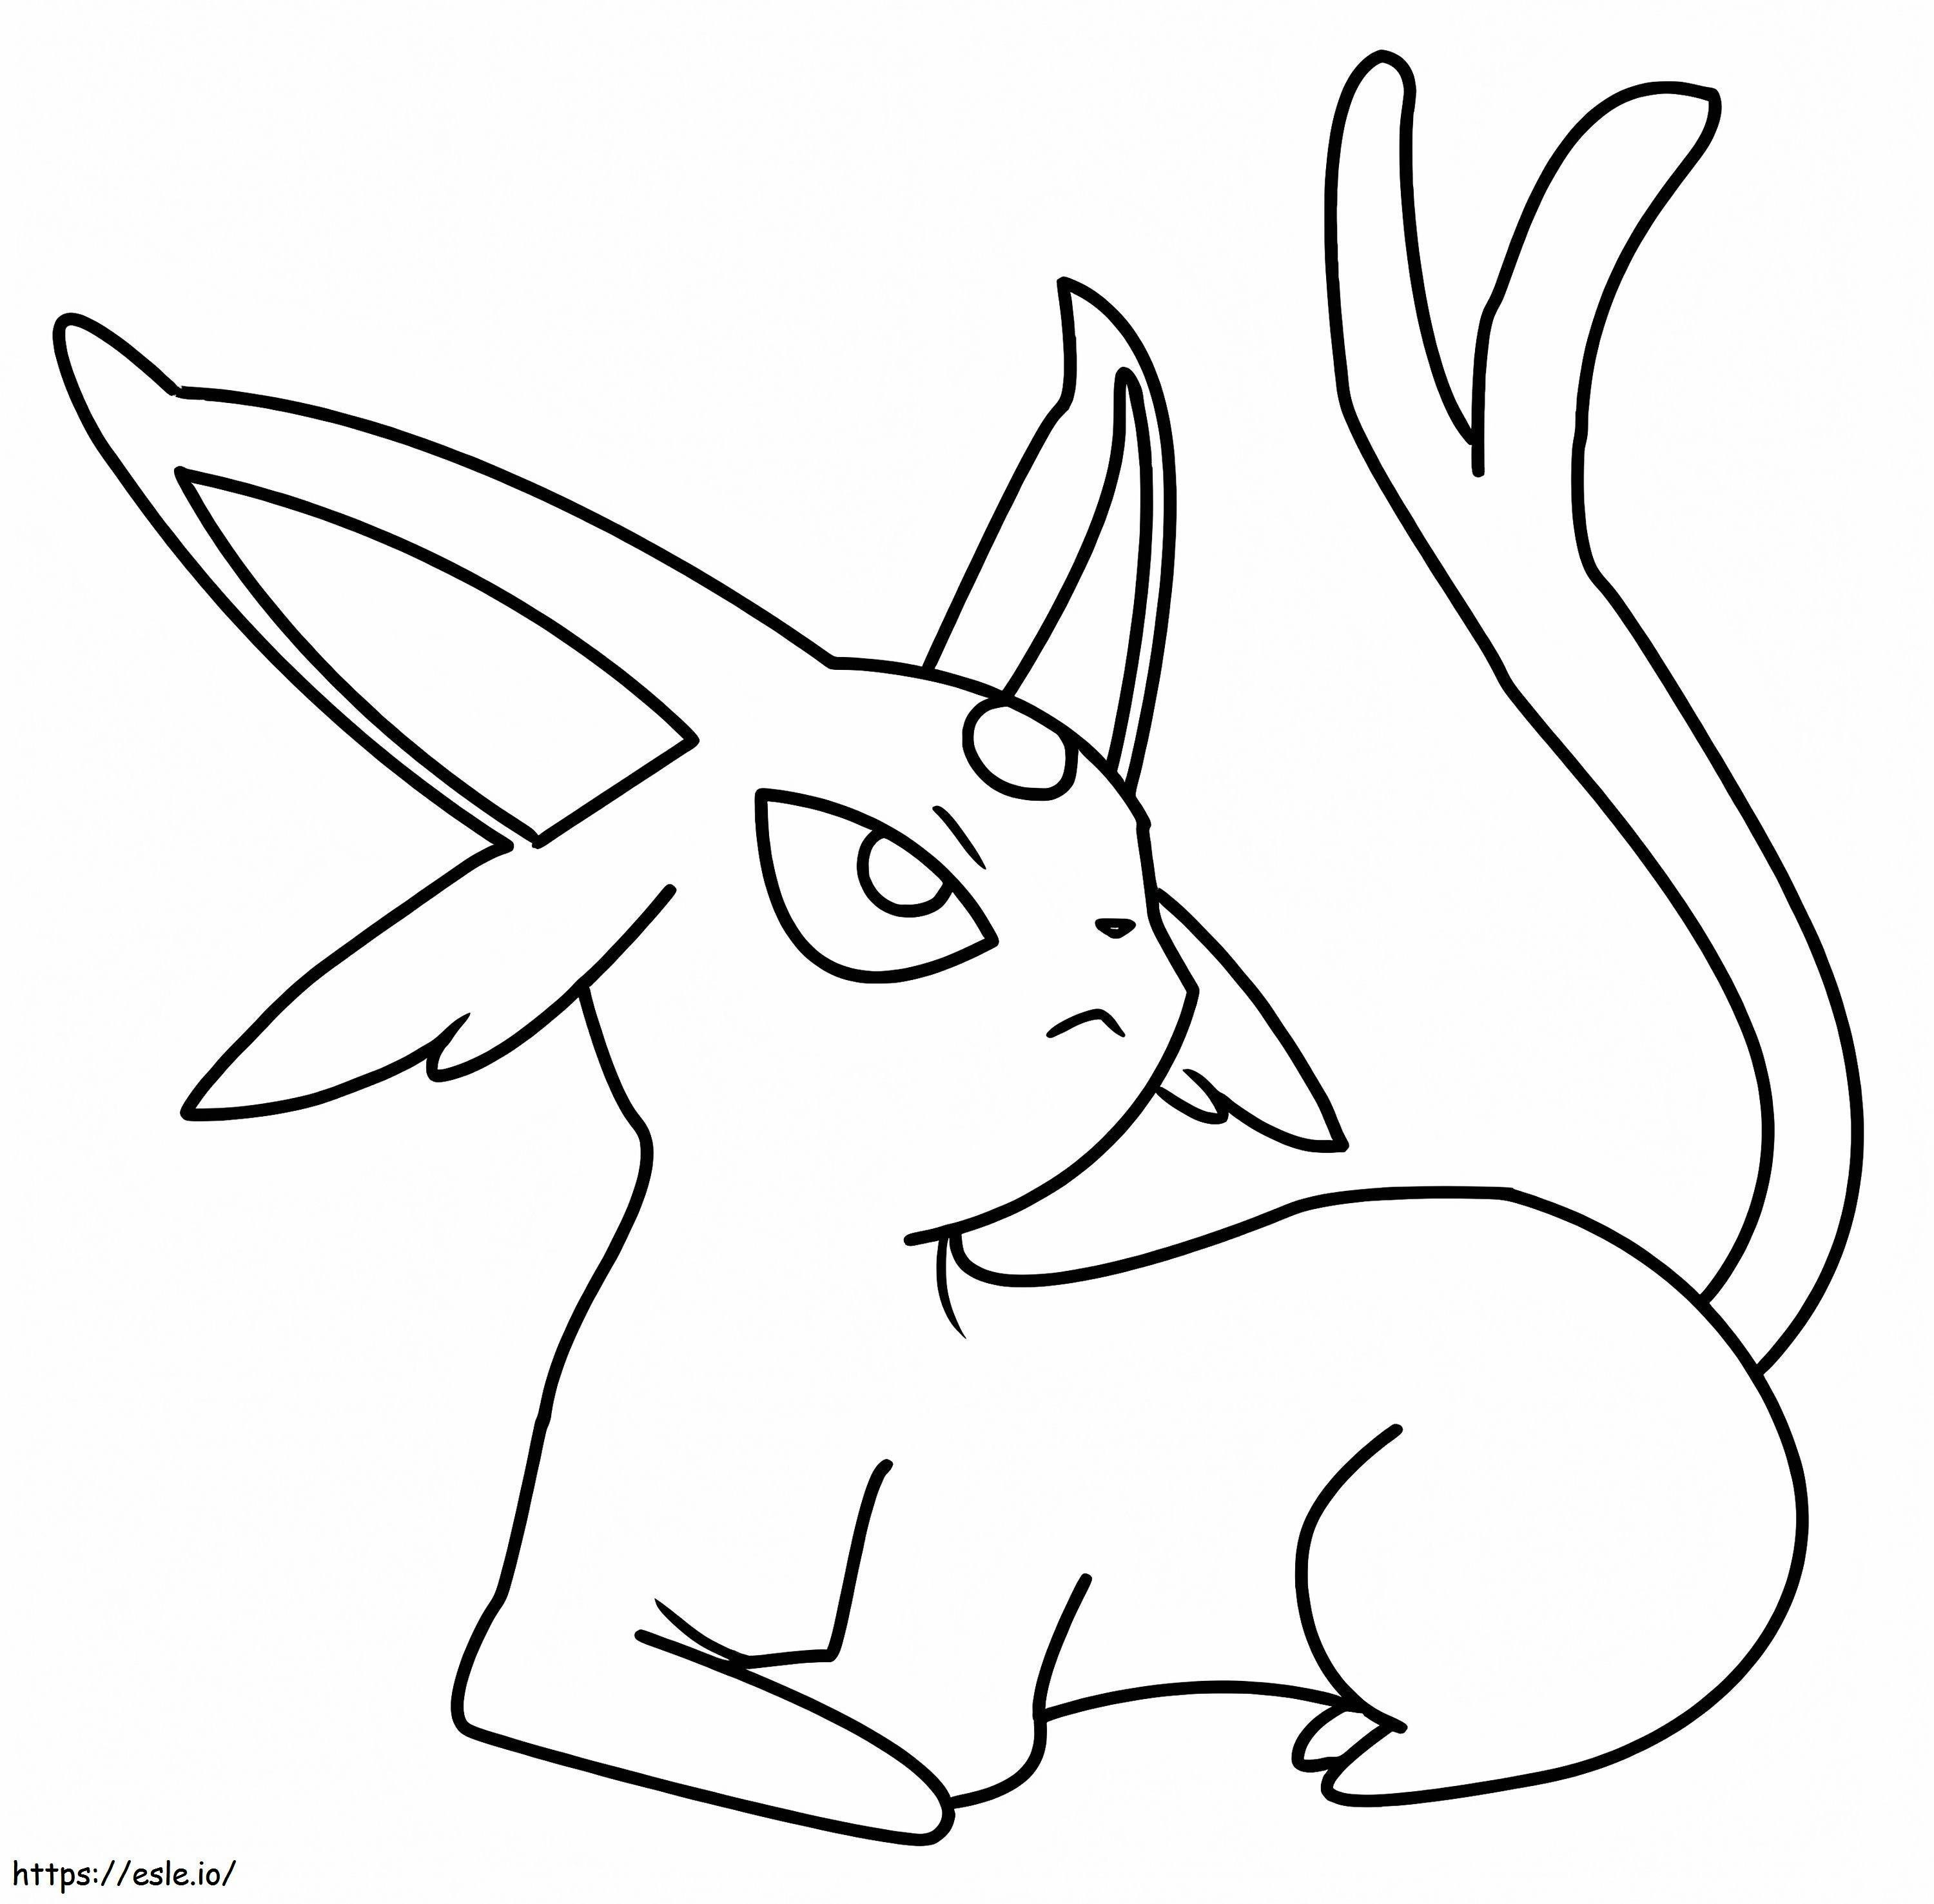 Espeon 4 coloring page